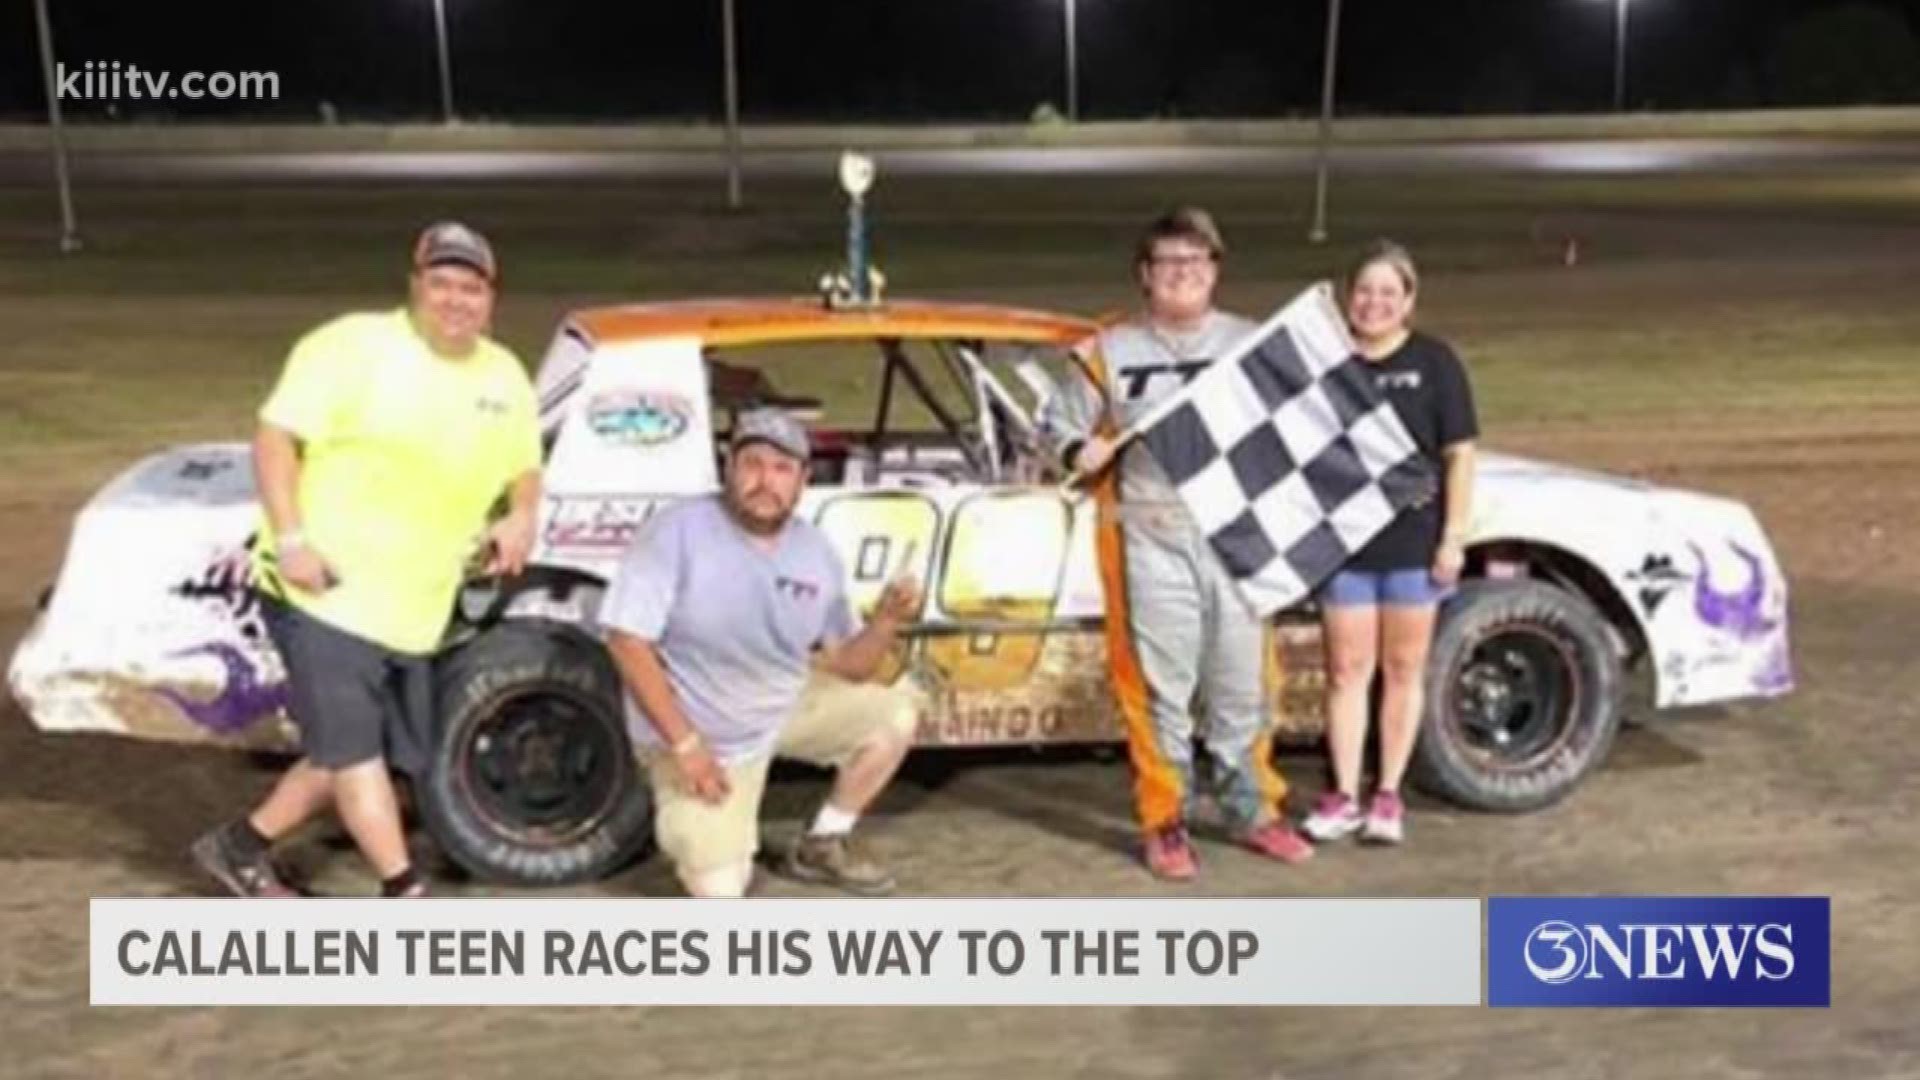 A Coastal bend is racing his way to the top of the South Texas dirt racing charts.